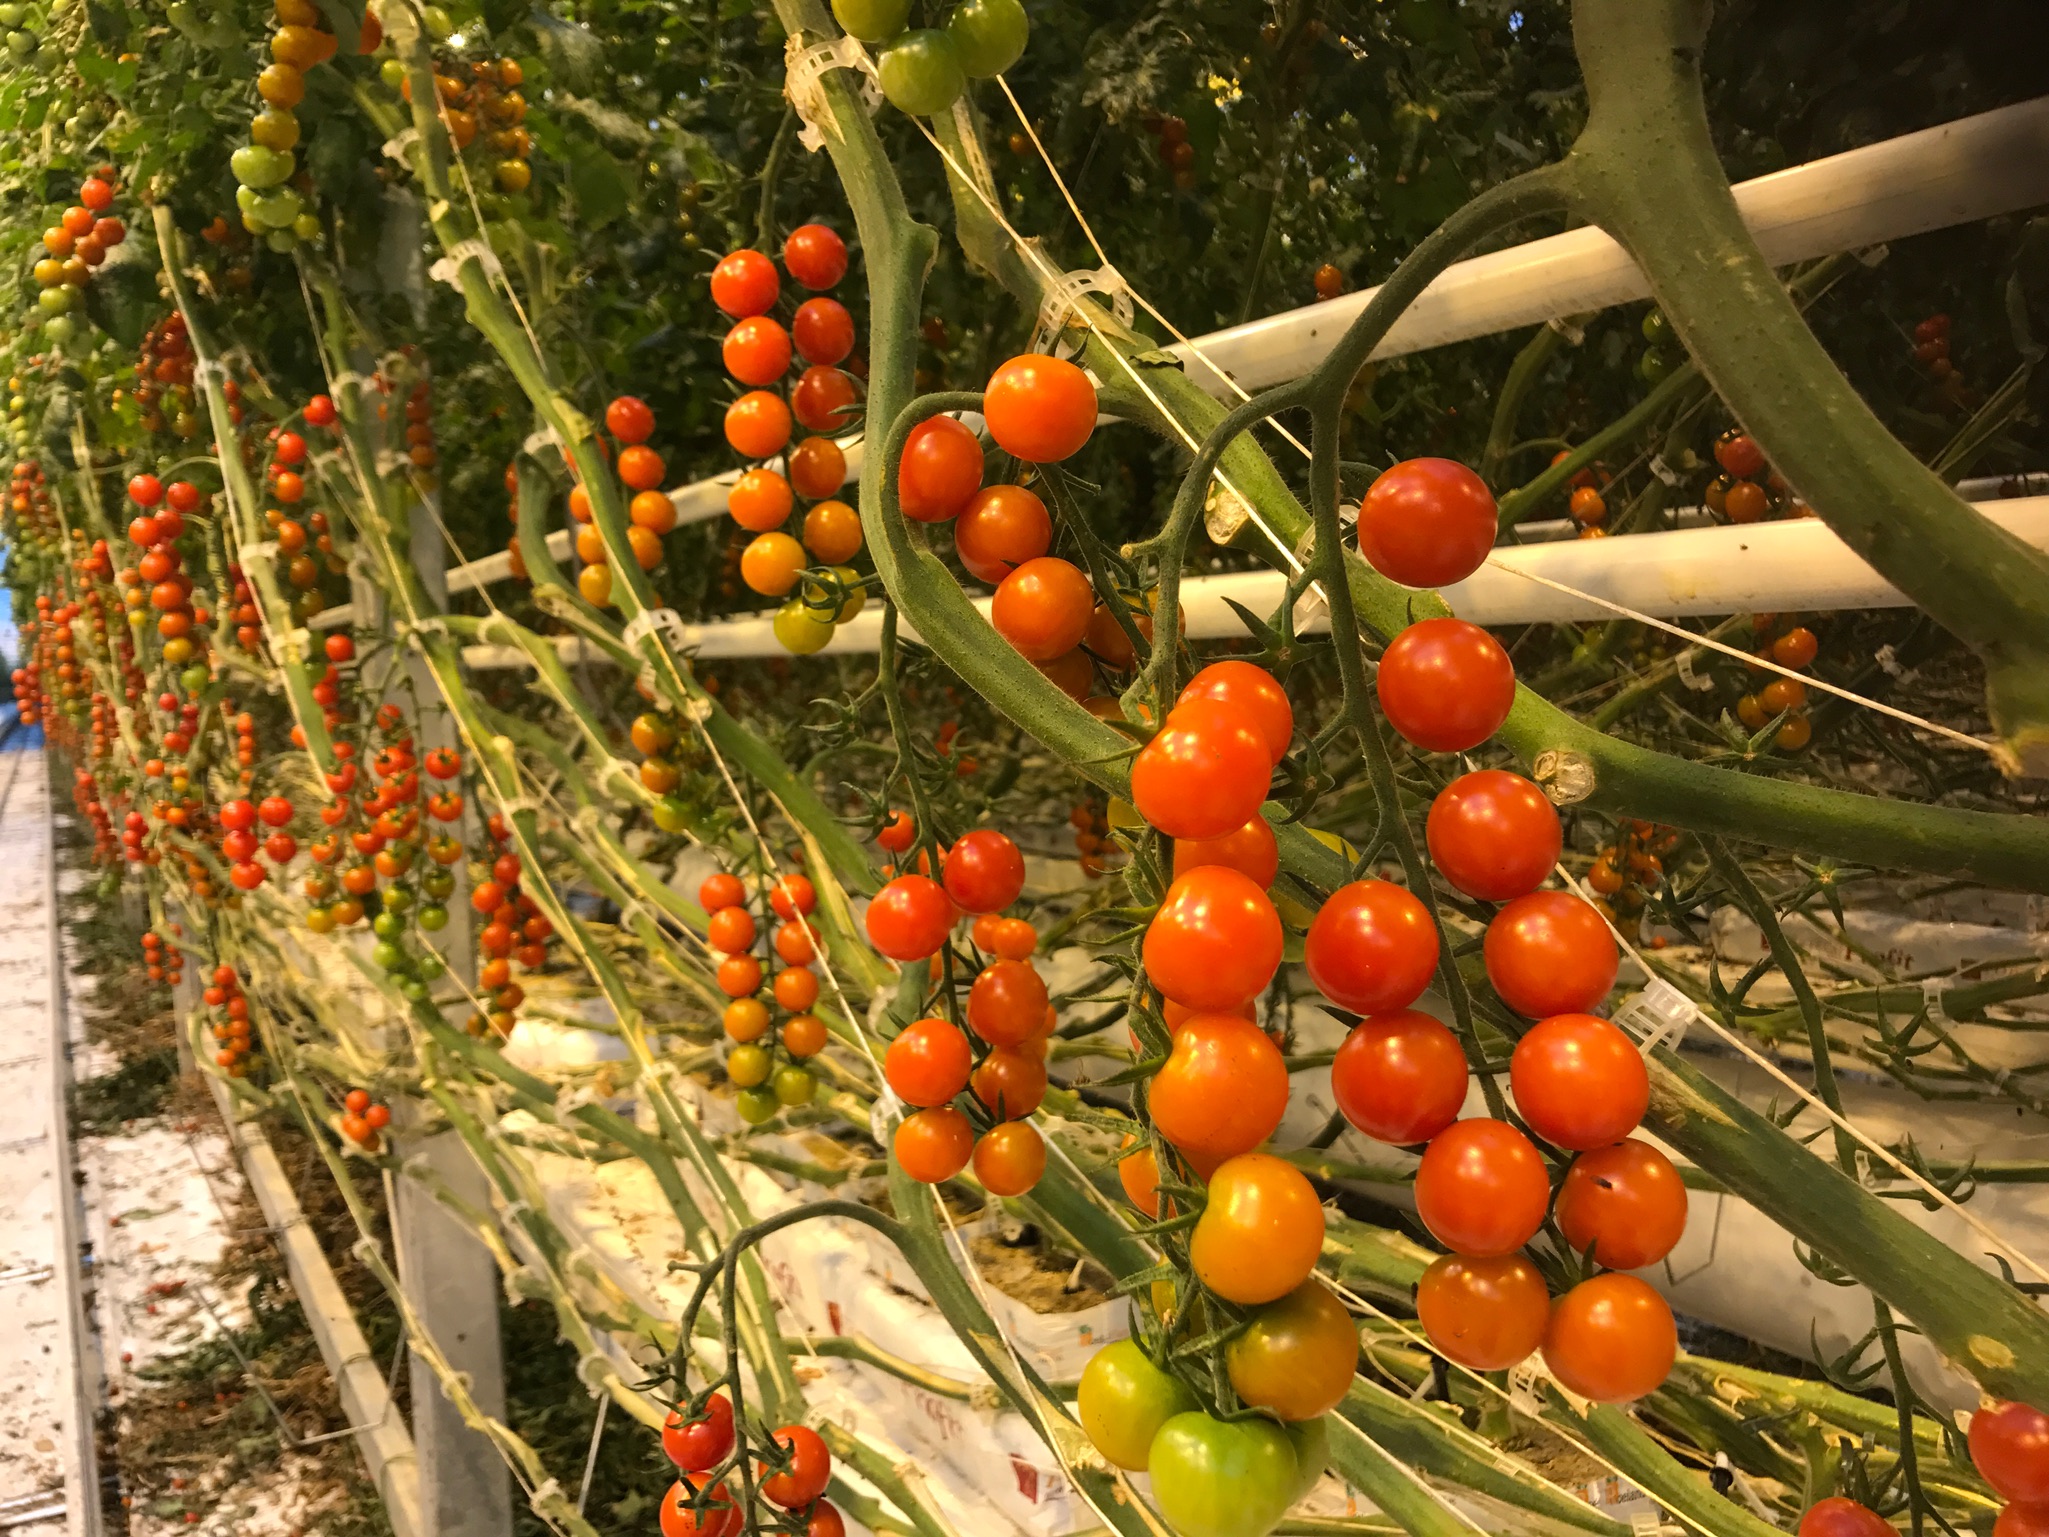 NFF-Tomatoes-Delta-28Jan2017